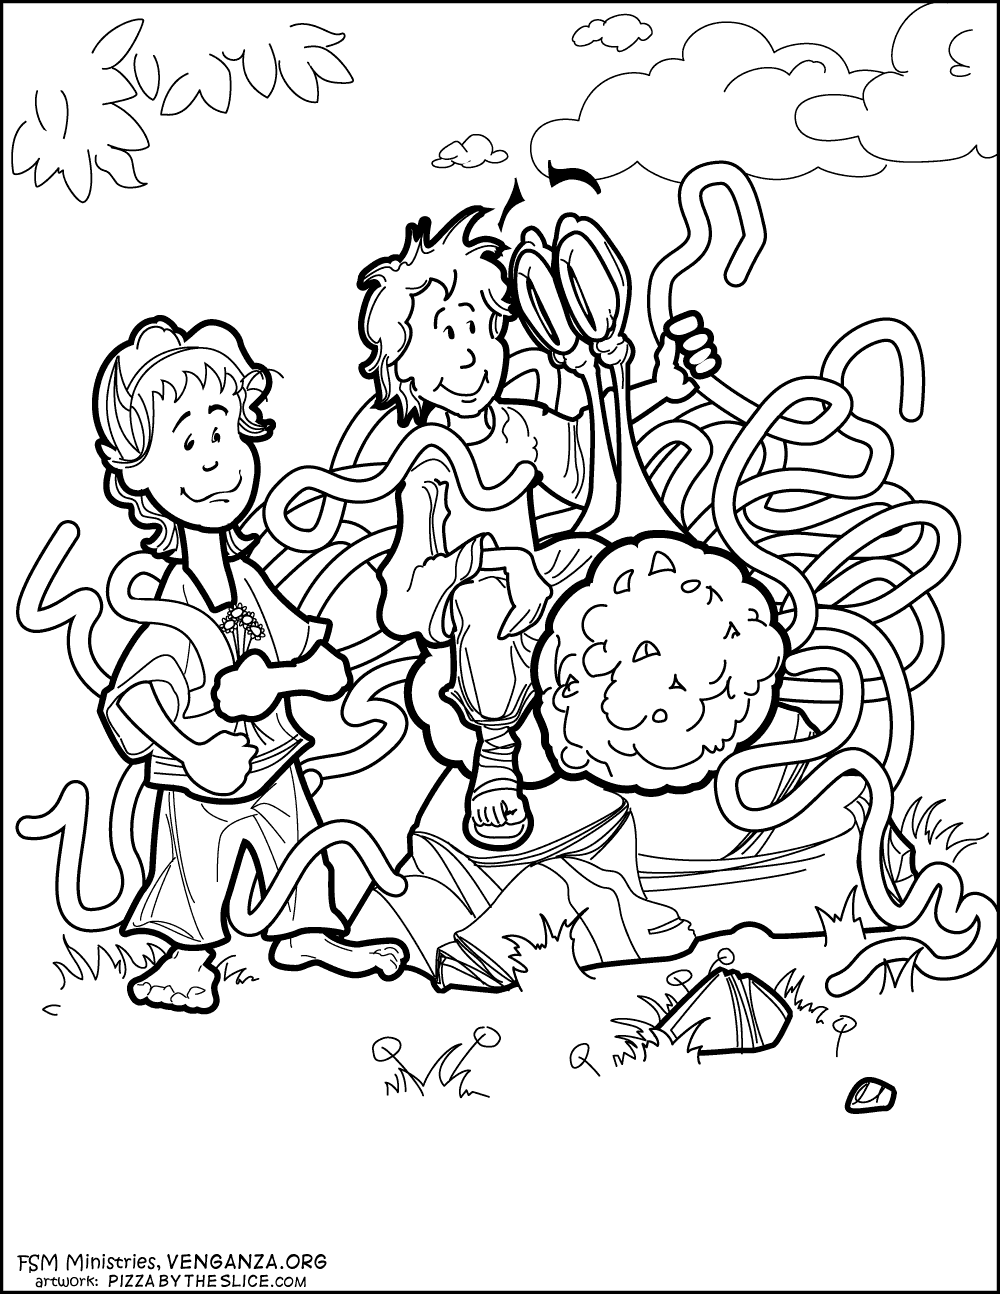 Challenging Coloring Pages